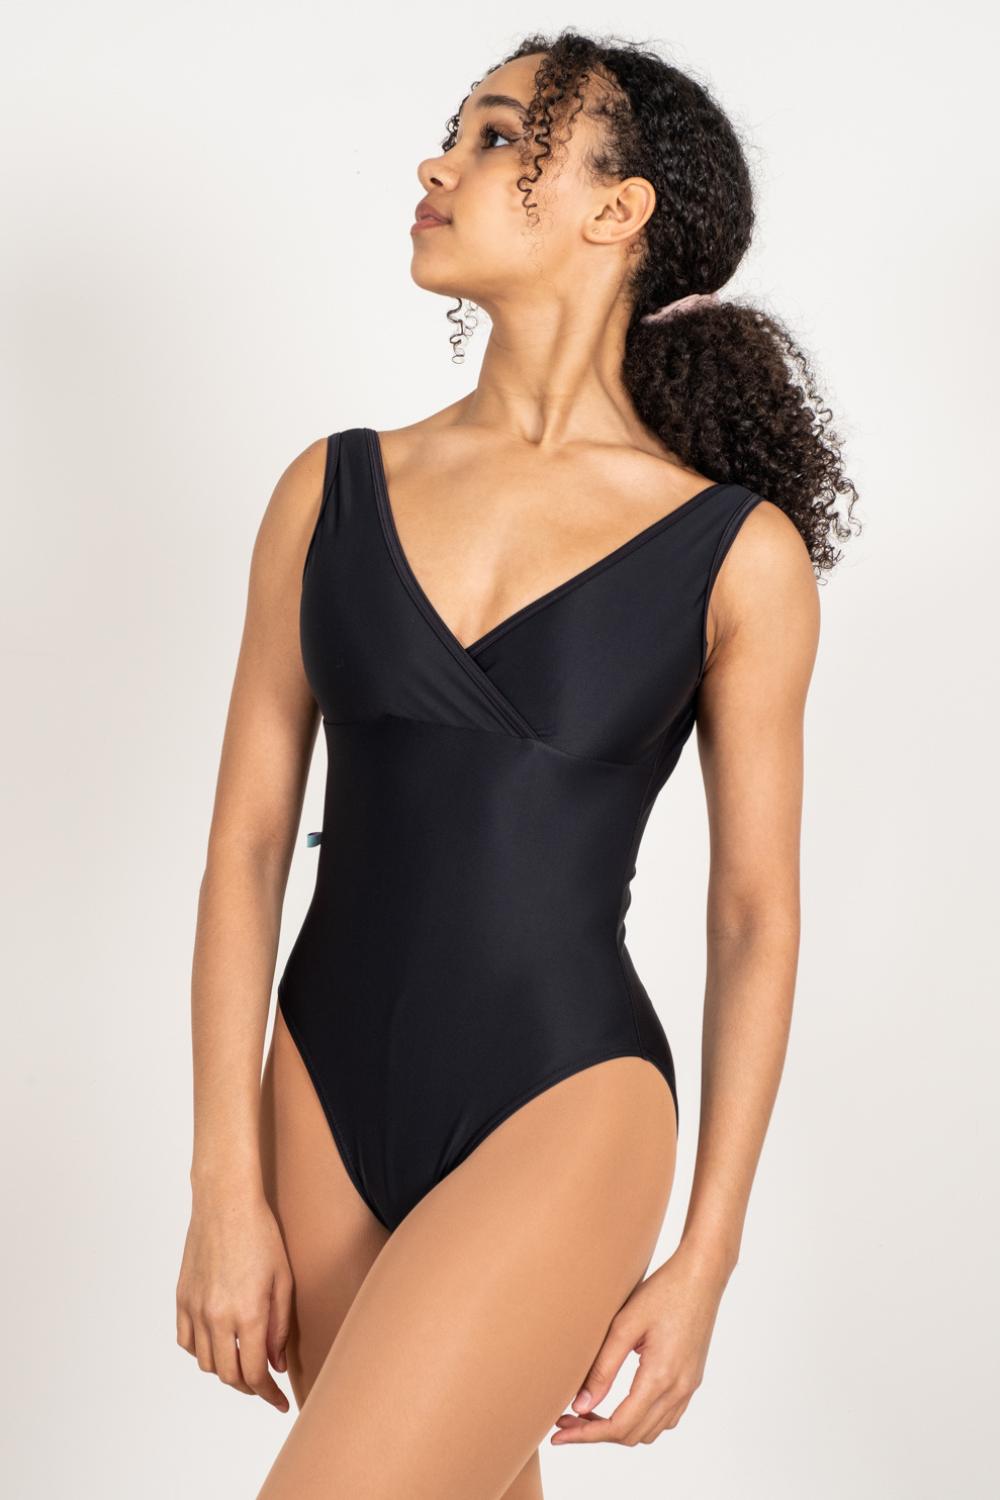 ballet dancer in black marseille leotard with wrap front made from ECONYL 